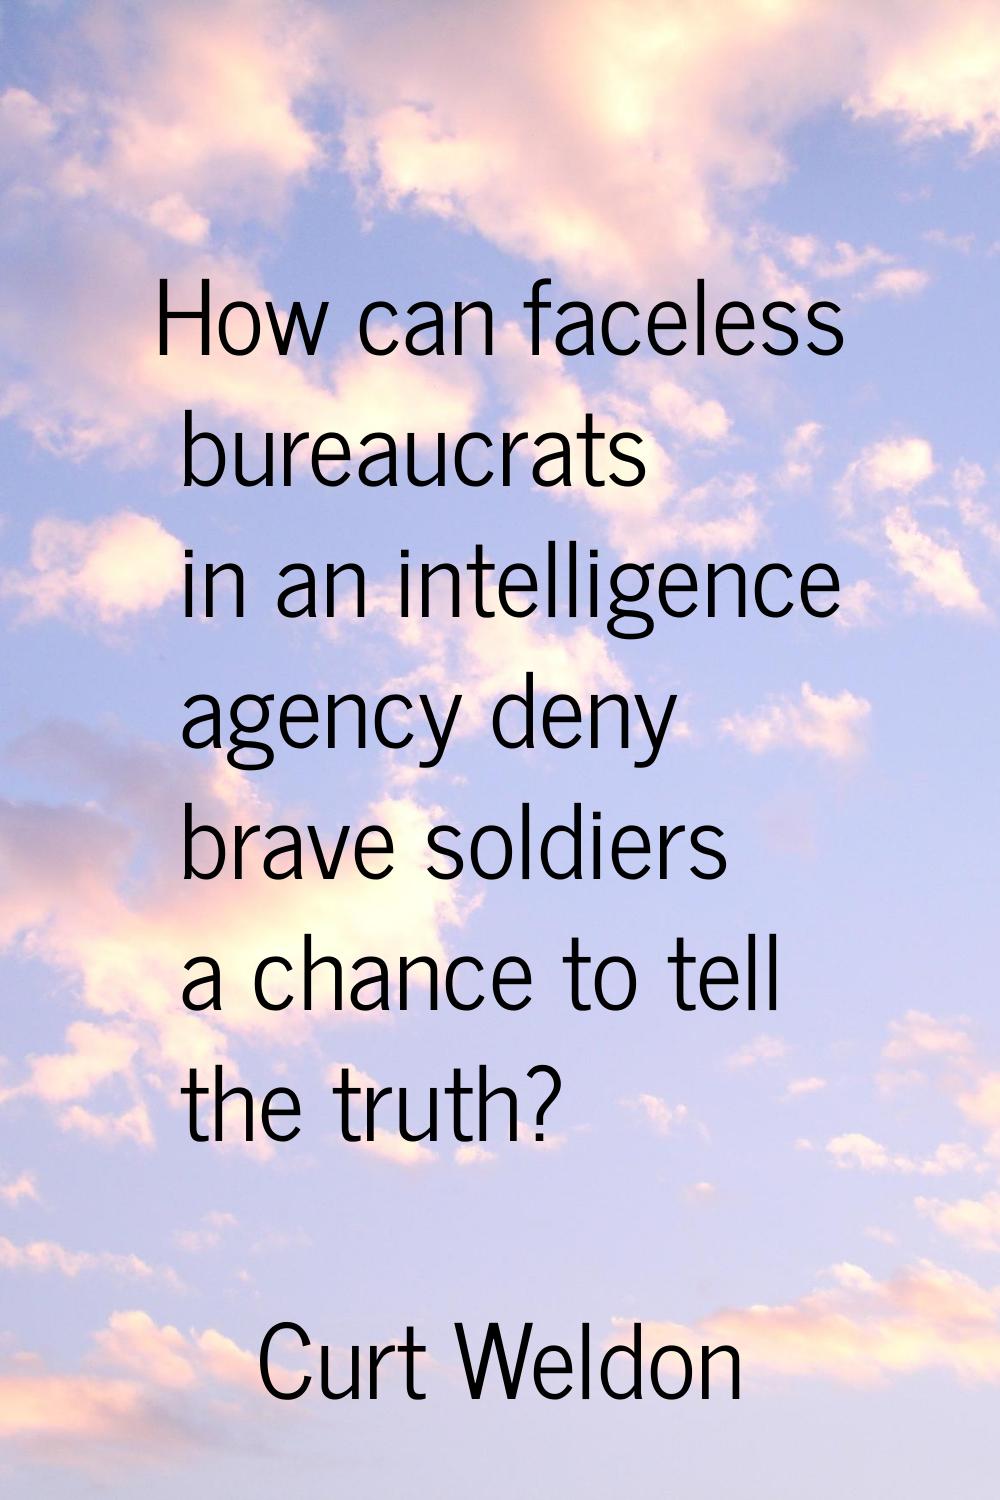 How can faceless bureaucrats in an intelligence agency deny brave soldiers a chance to tell the tru